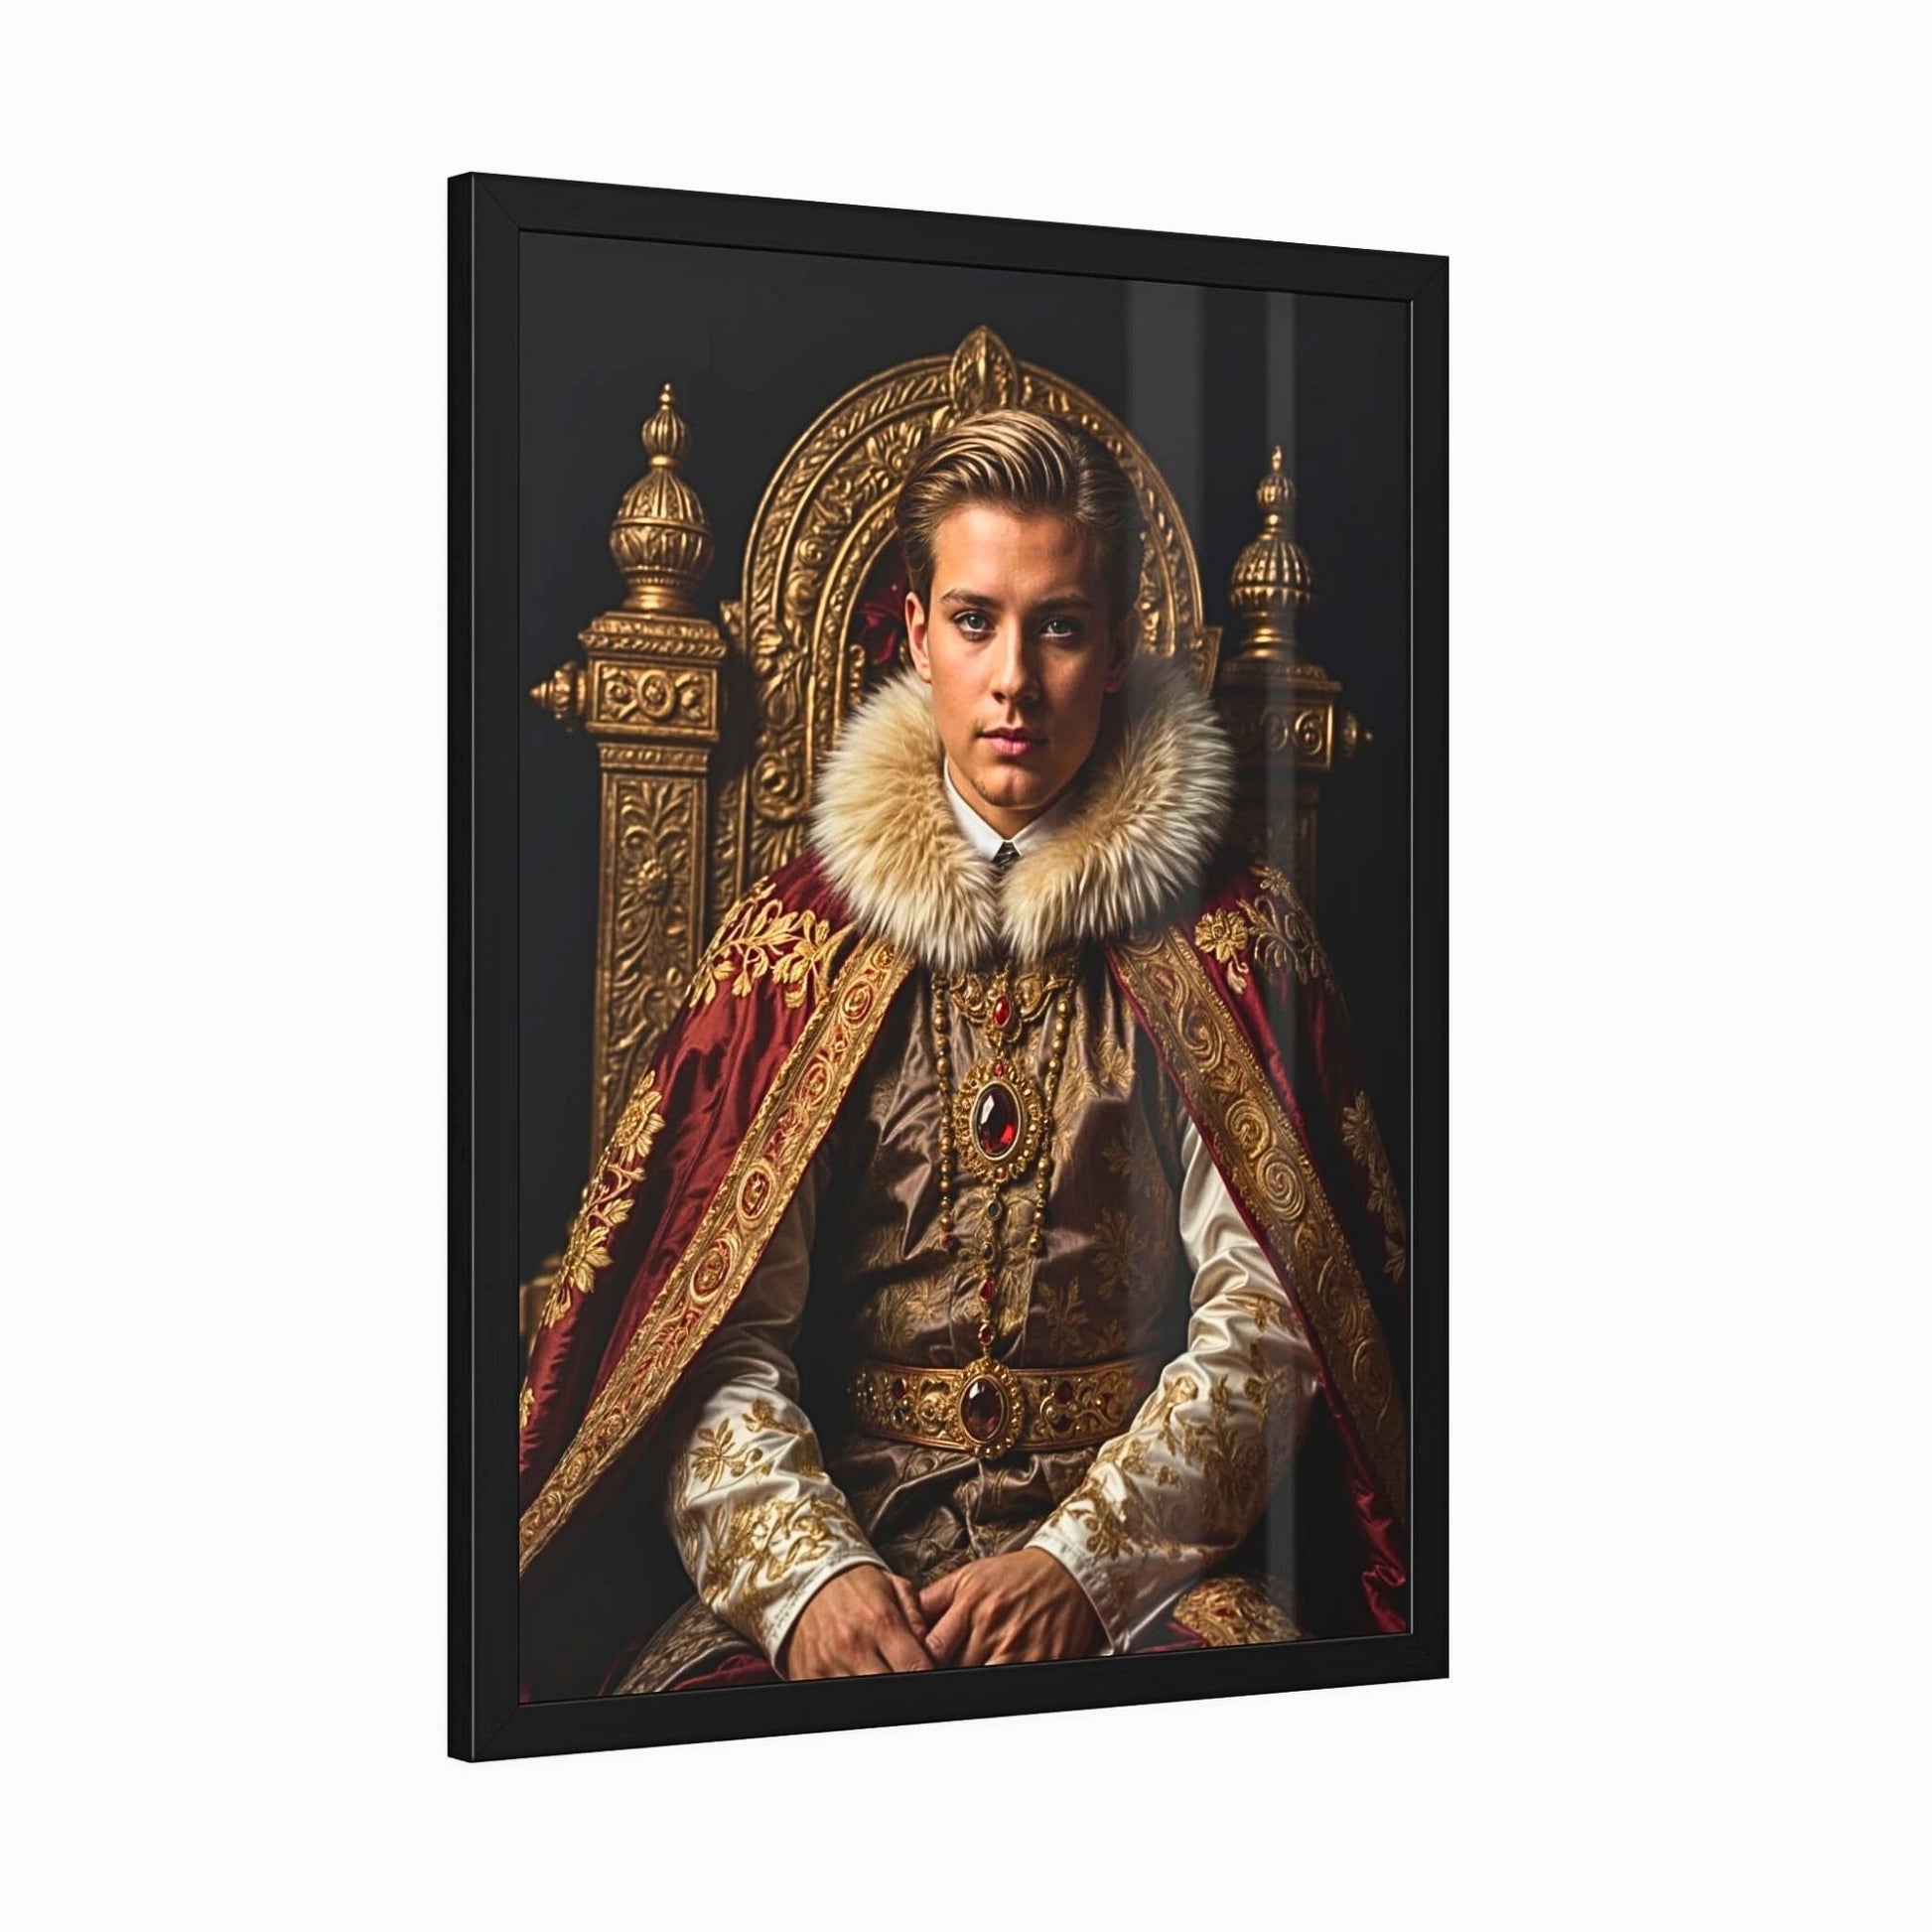 Elevate a cherished moment into a majestic custom royal portrait, reminiscent of the Renaissance era. Whether as a birthday surprise or a thoughtful gift for him, this personalized king portrait exudes timeless charm. With its historical allure and digital download option, it's a perfect blend of artistry and sentimentality.